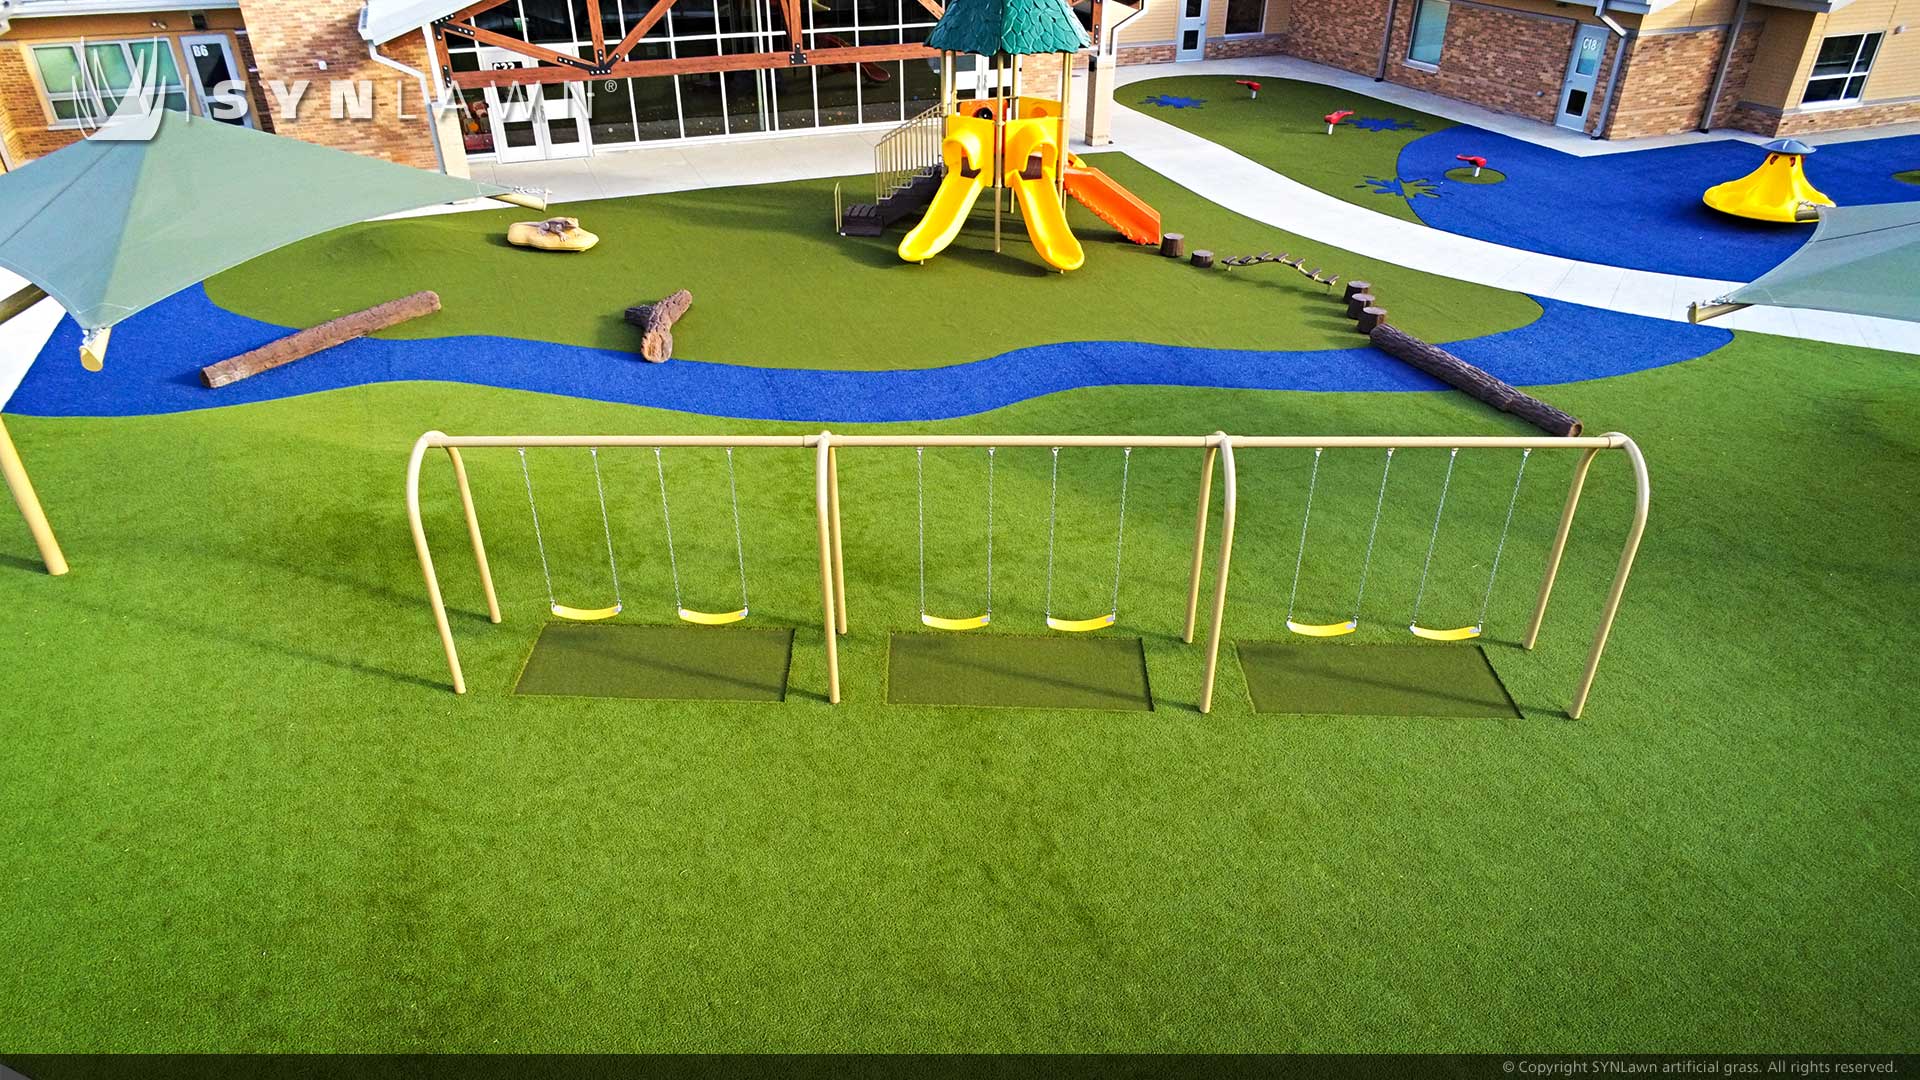 image of synlawn artificial grass at liggett trails early education center featuring colored artificial turf